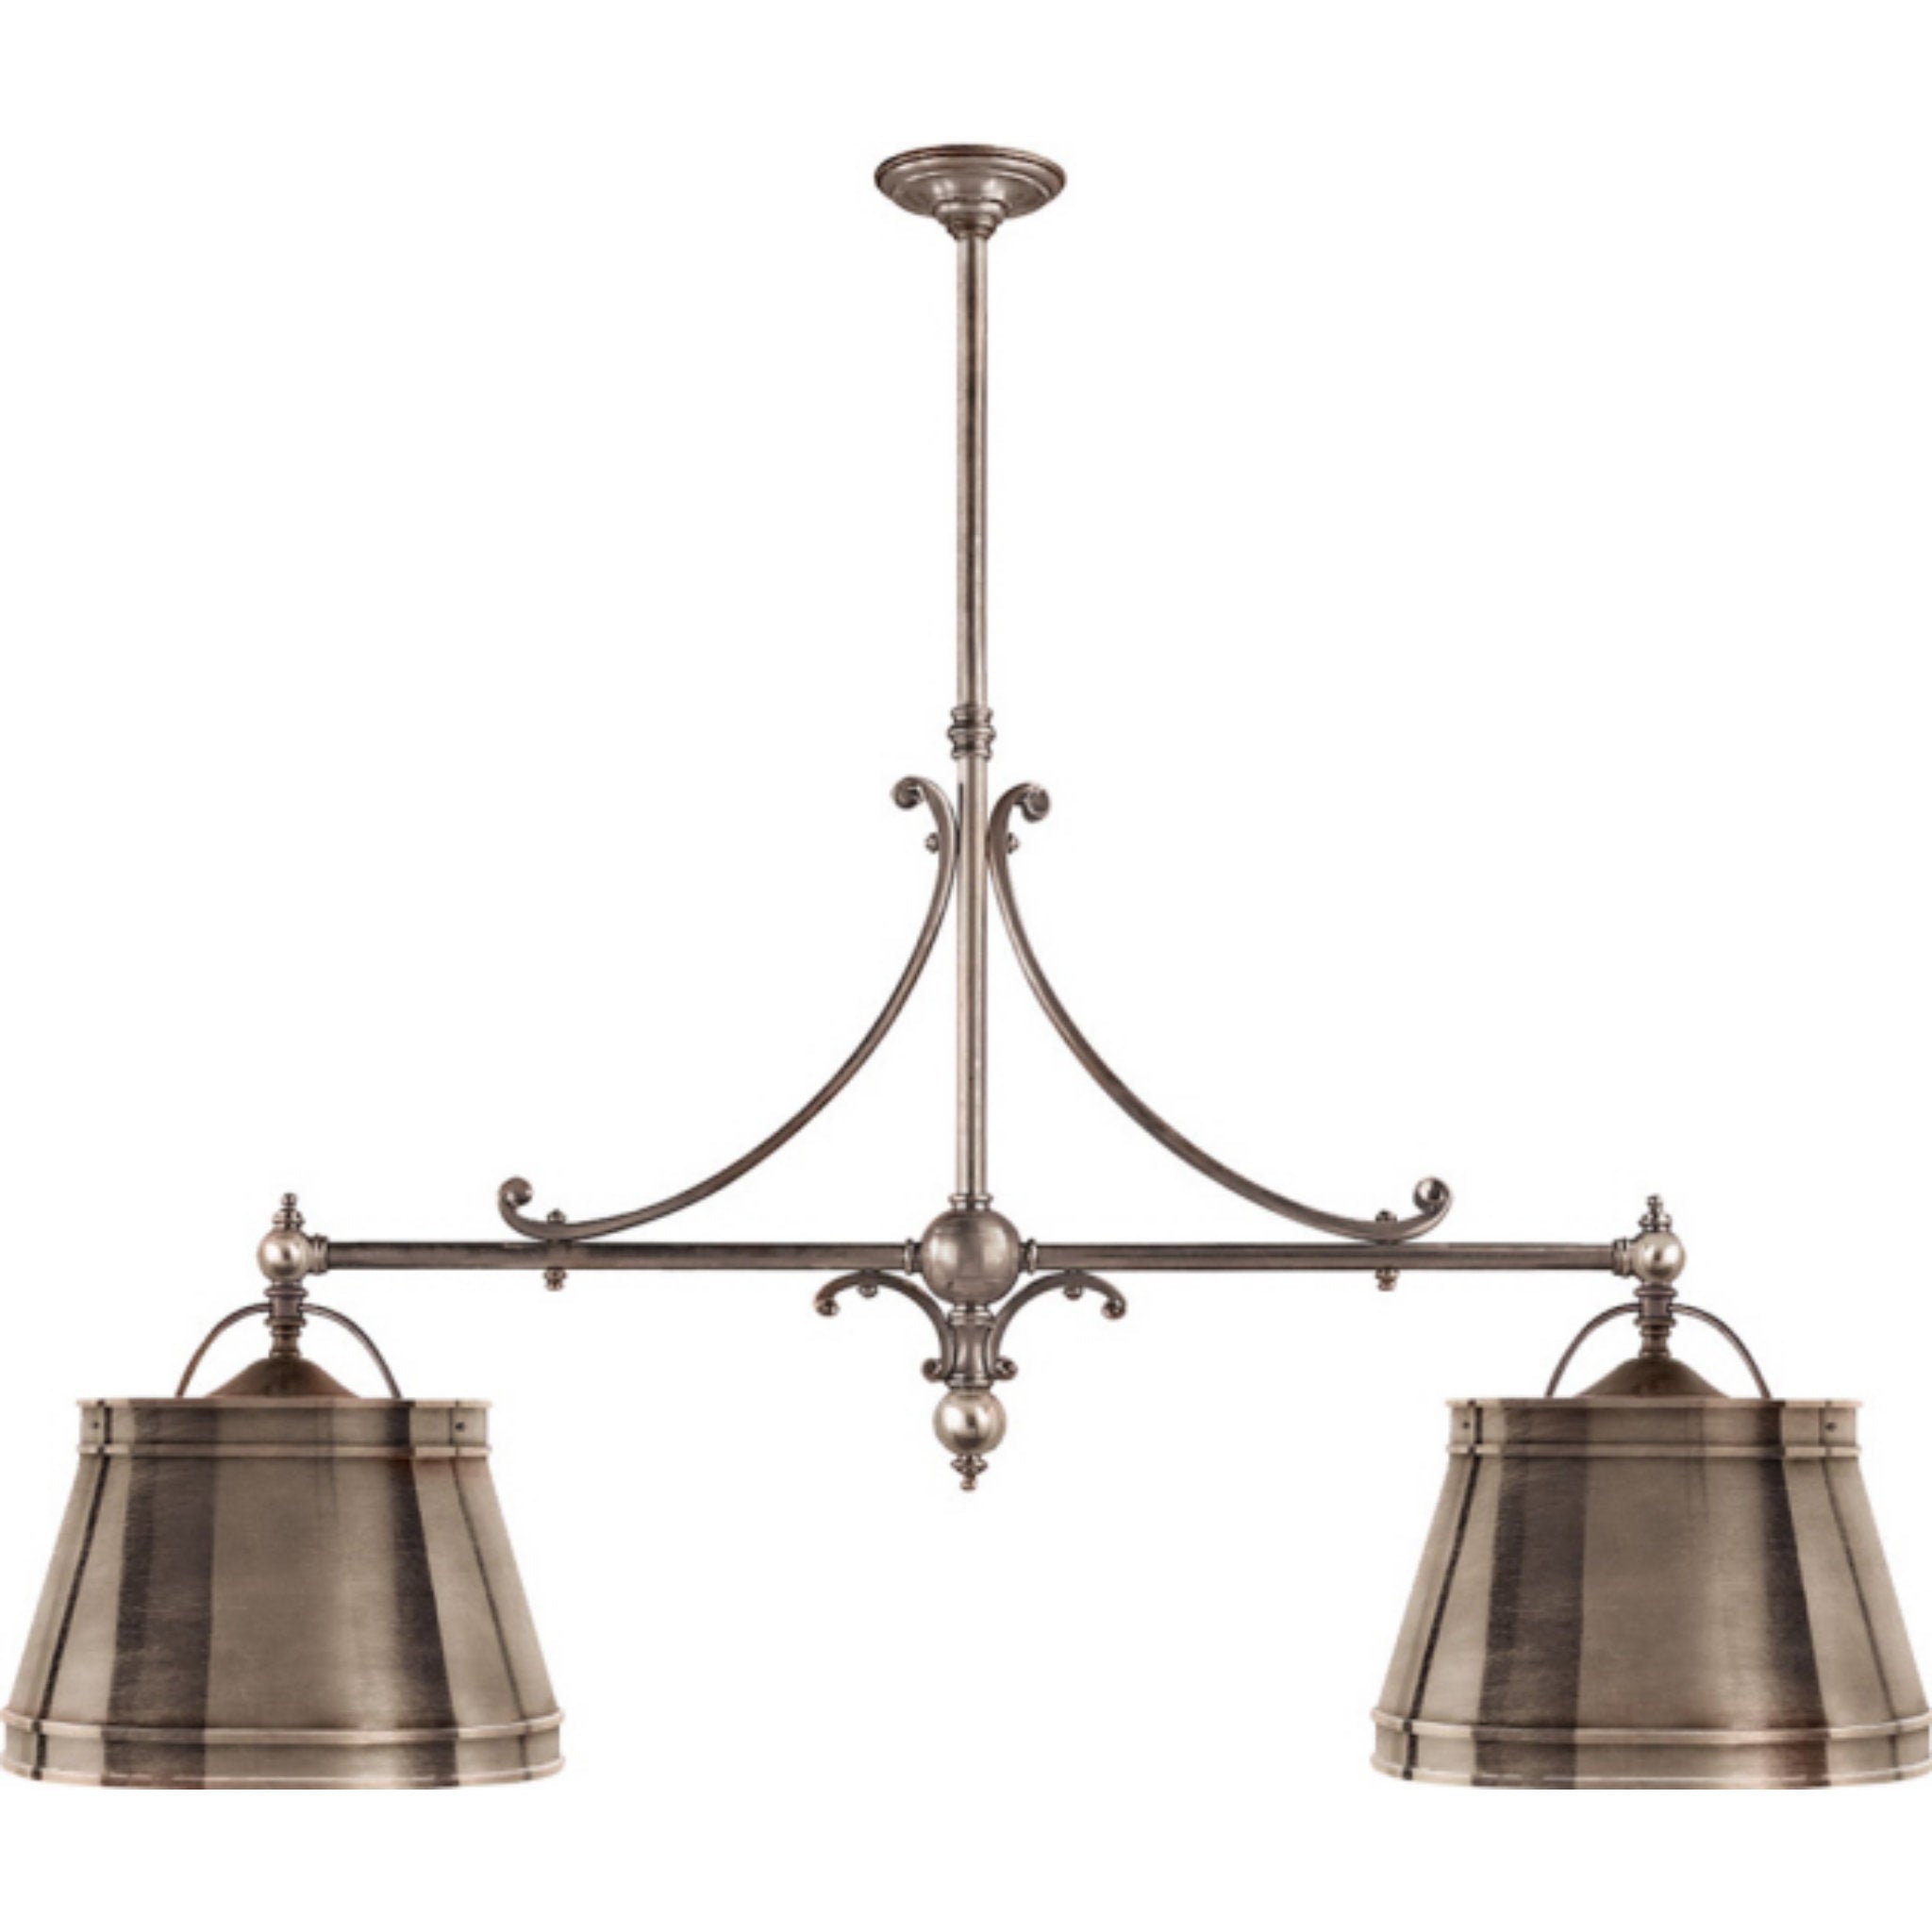 Chapman & Myers Sloane Double Shop Pendant in Antique Nickel with Antique Nickel Shades